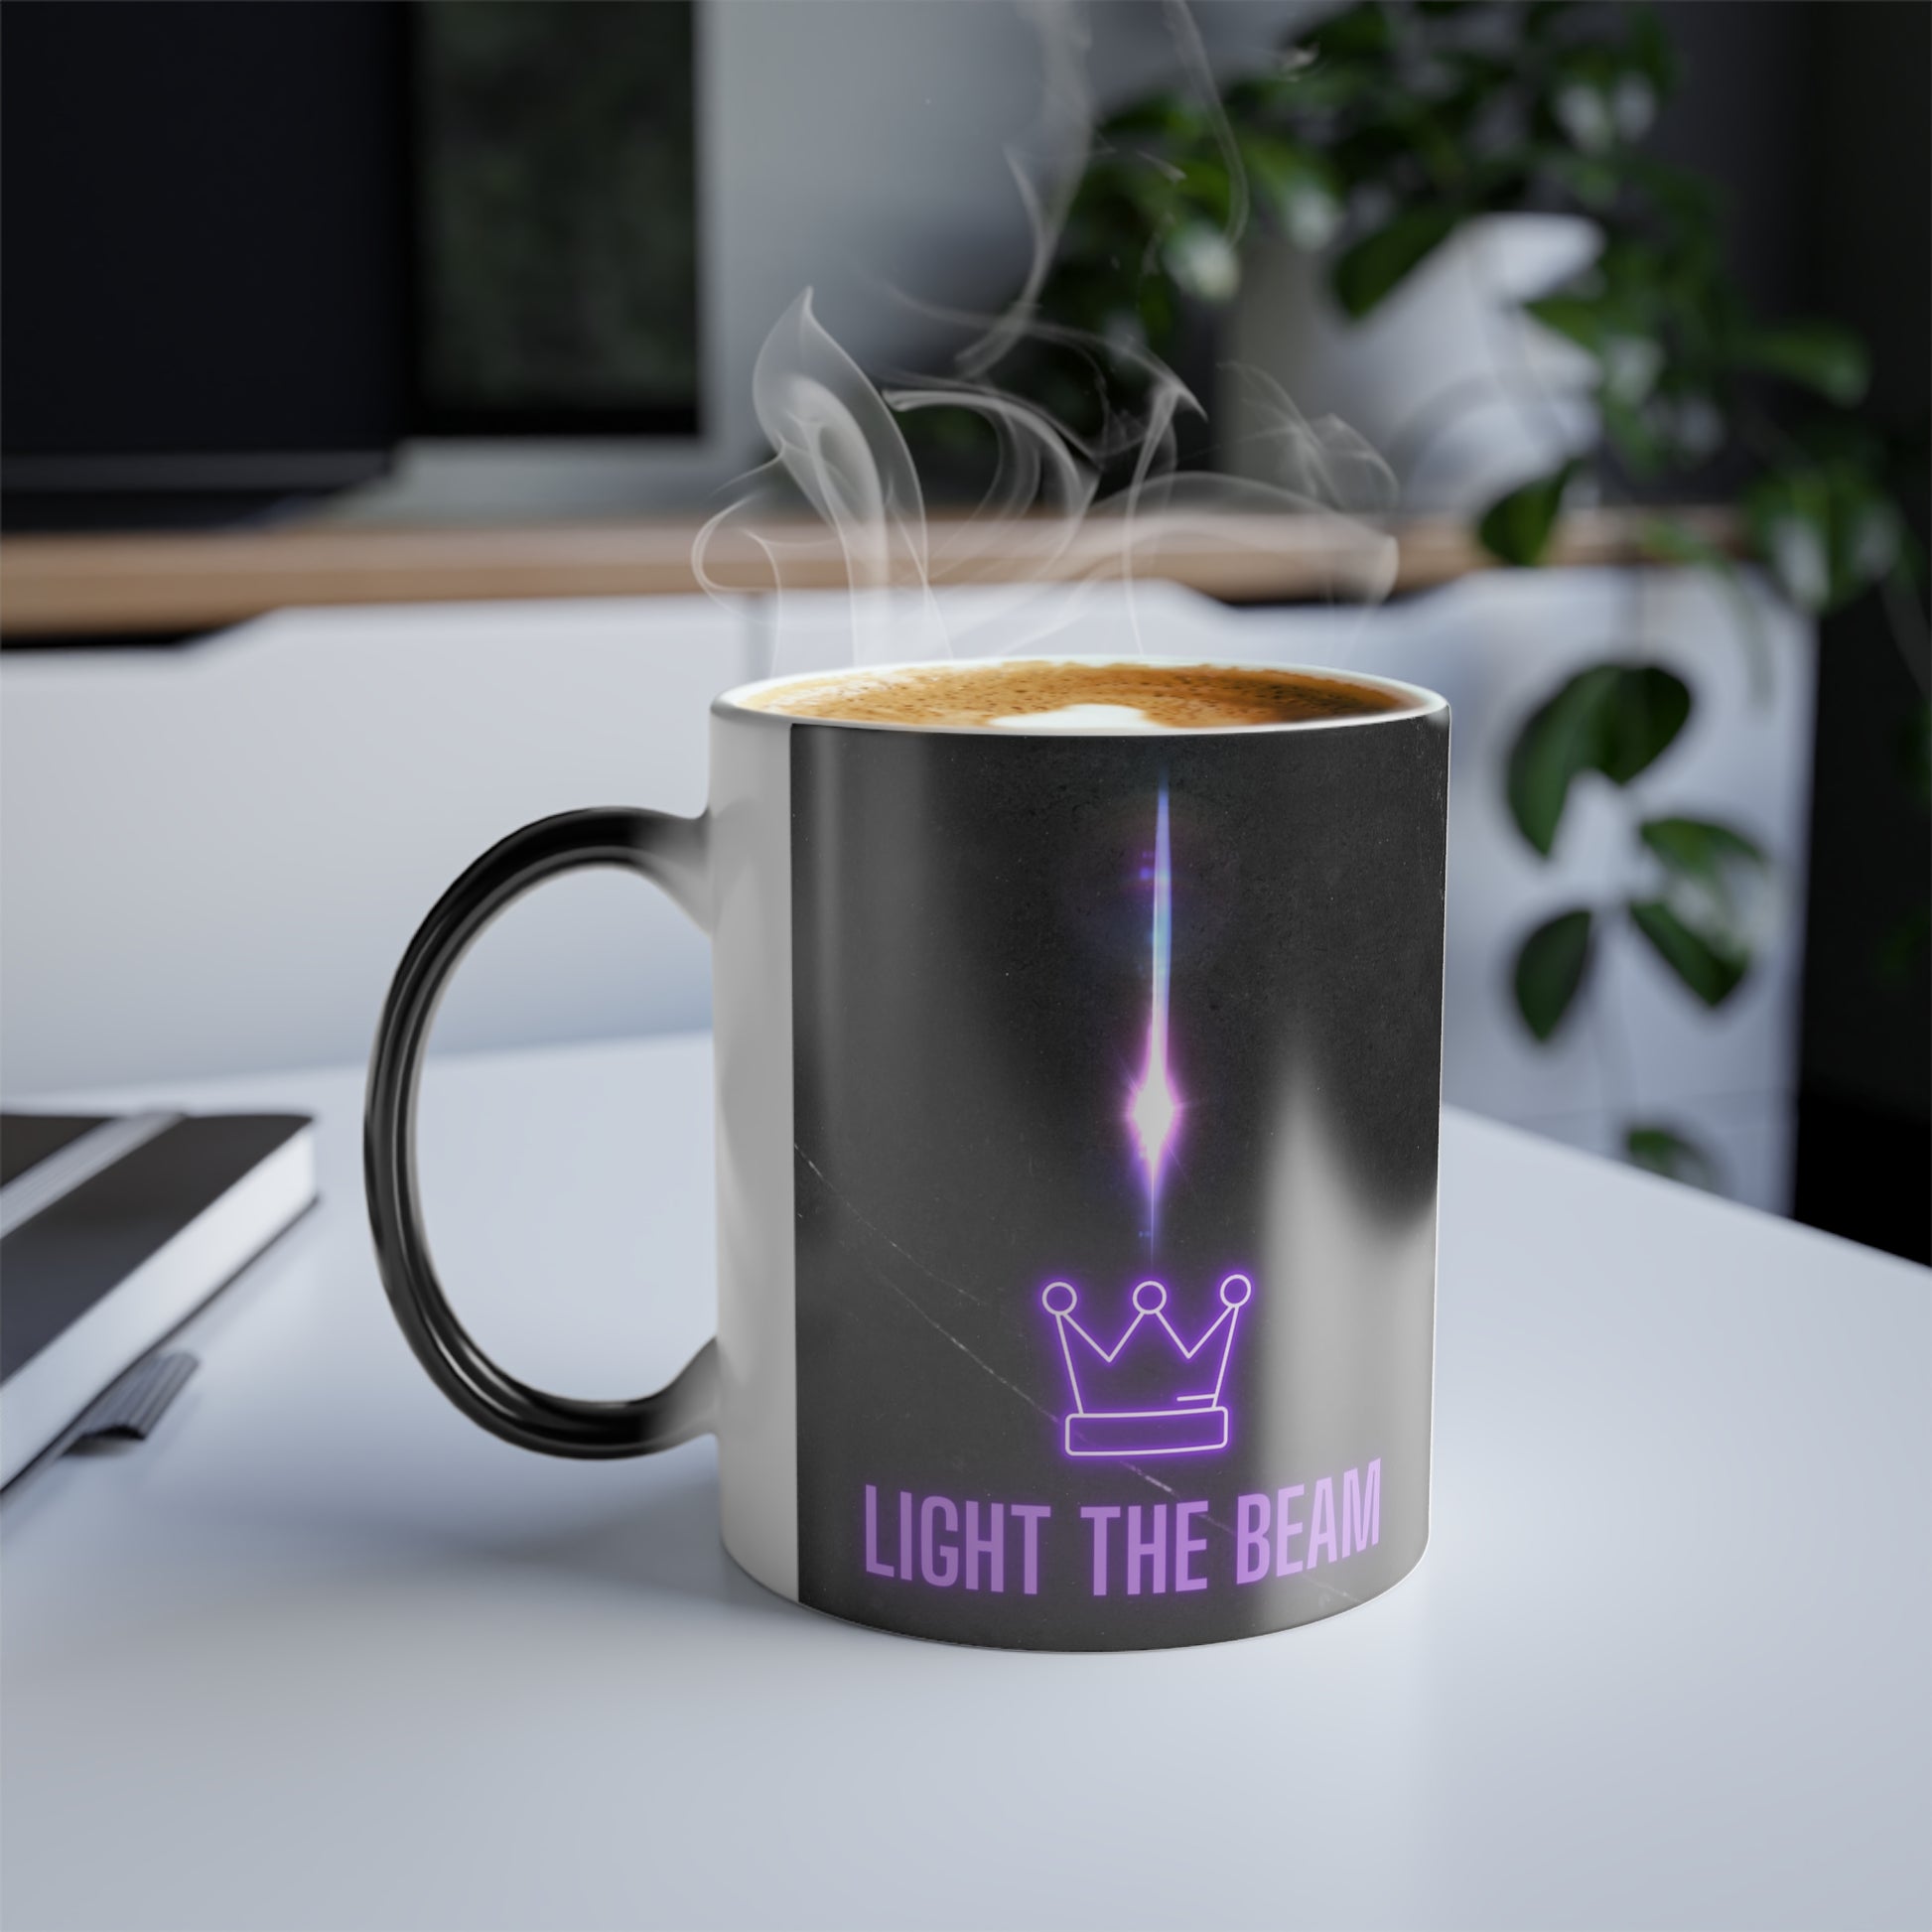 Light the Beam Kings Basketball Secret Reveal 11oz Mug.Light the Beam, BeamTown! Celebrate another W - WIN - for your Kings Basketball team and light the beam at home with this secret reveal mug. Mug is all black when cold but when hot liquid is poured in, the famous Sac Town Beam is revealed. Perfect way to show off another W at the office with your morning cup of coffee. Kids LOVE to light the beam themselves at home with their hot cocoa.